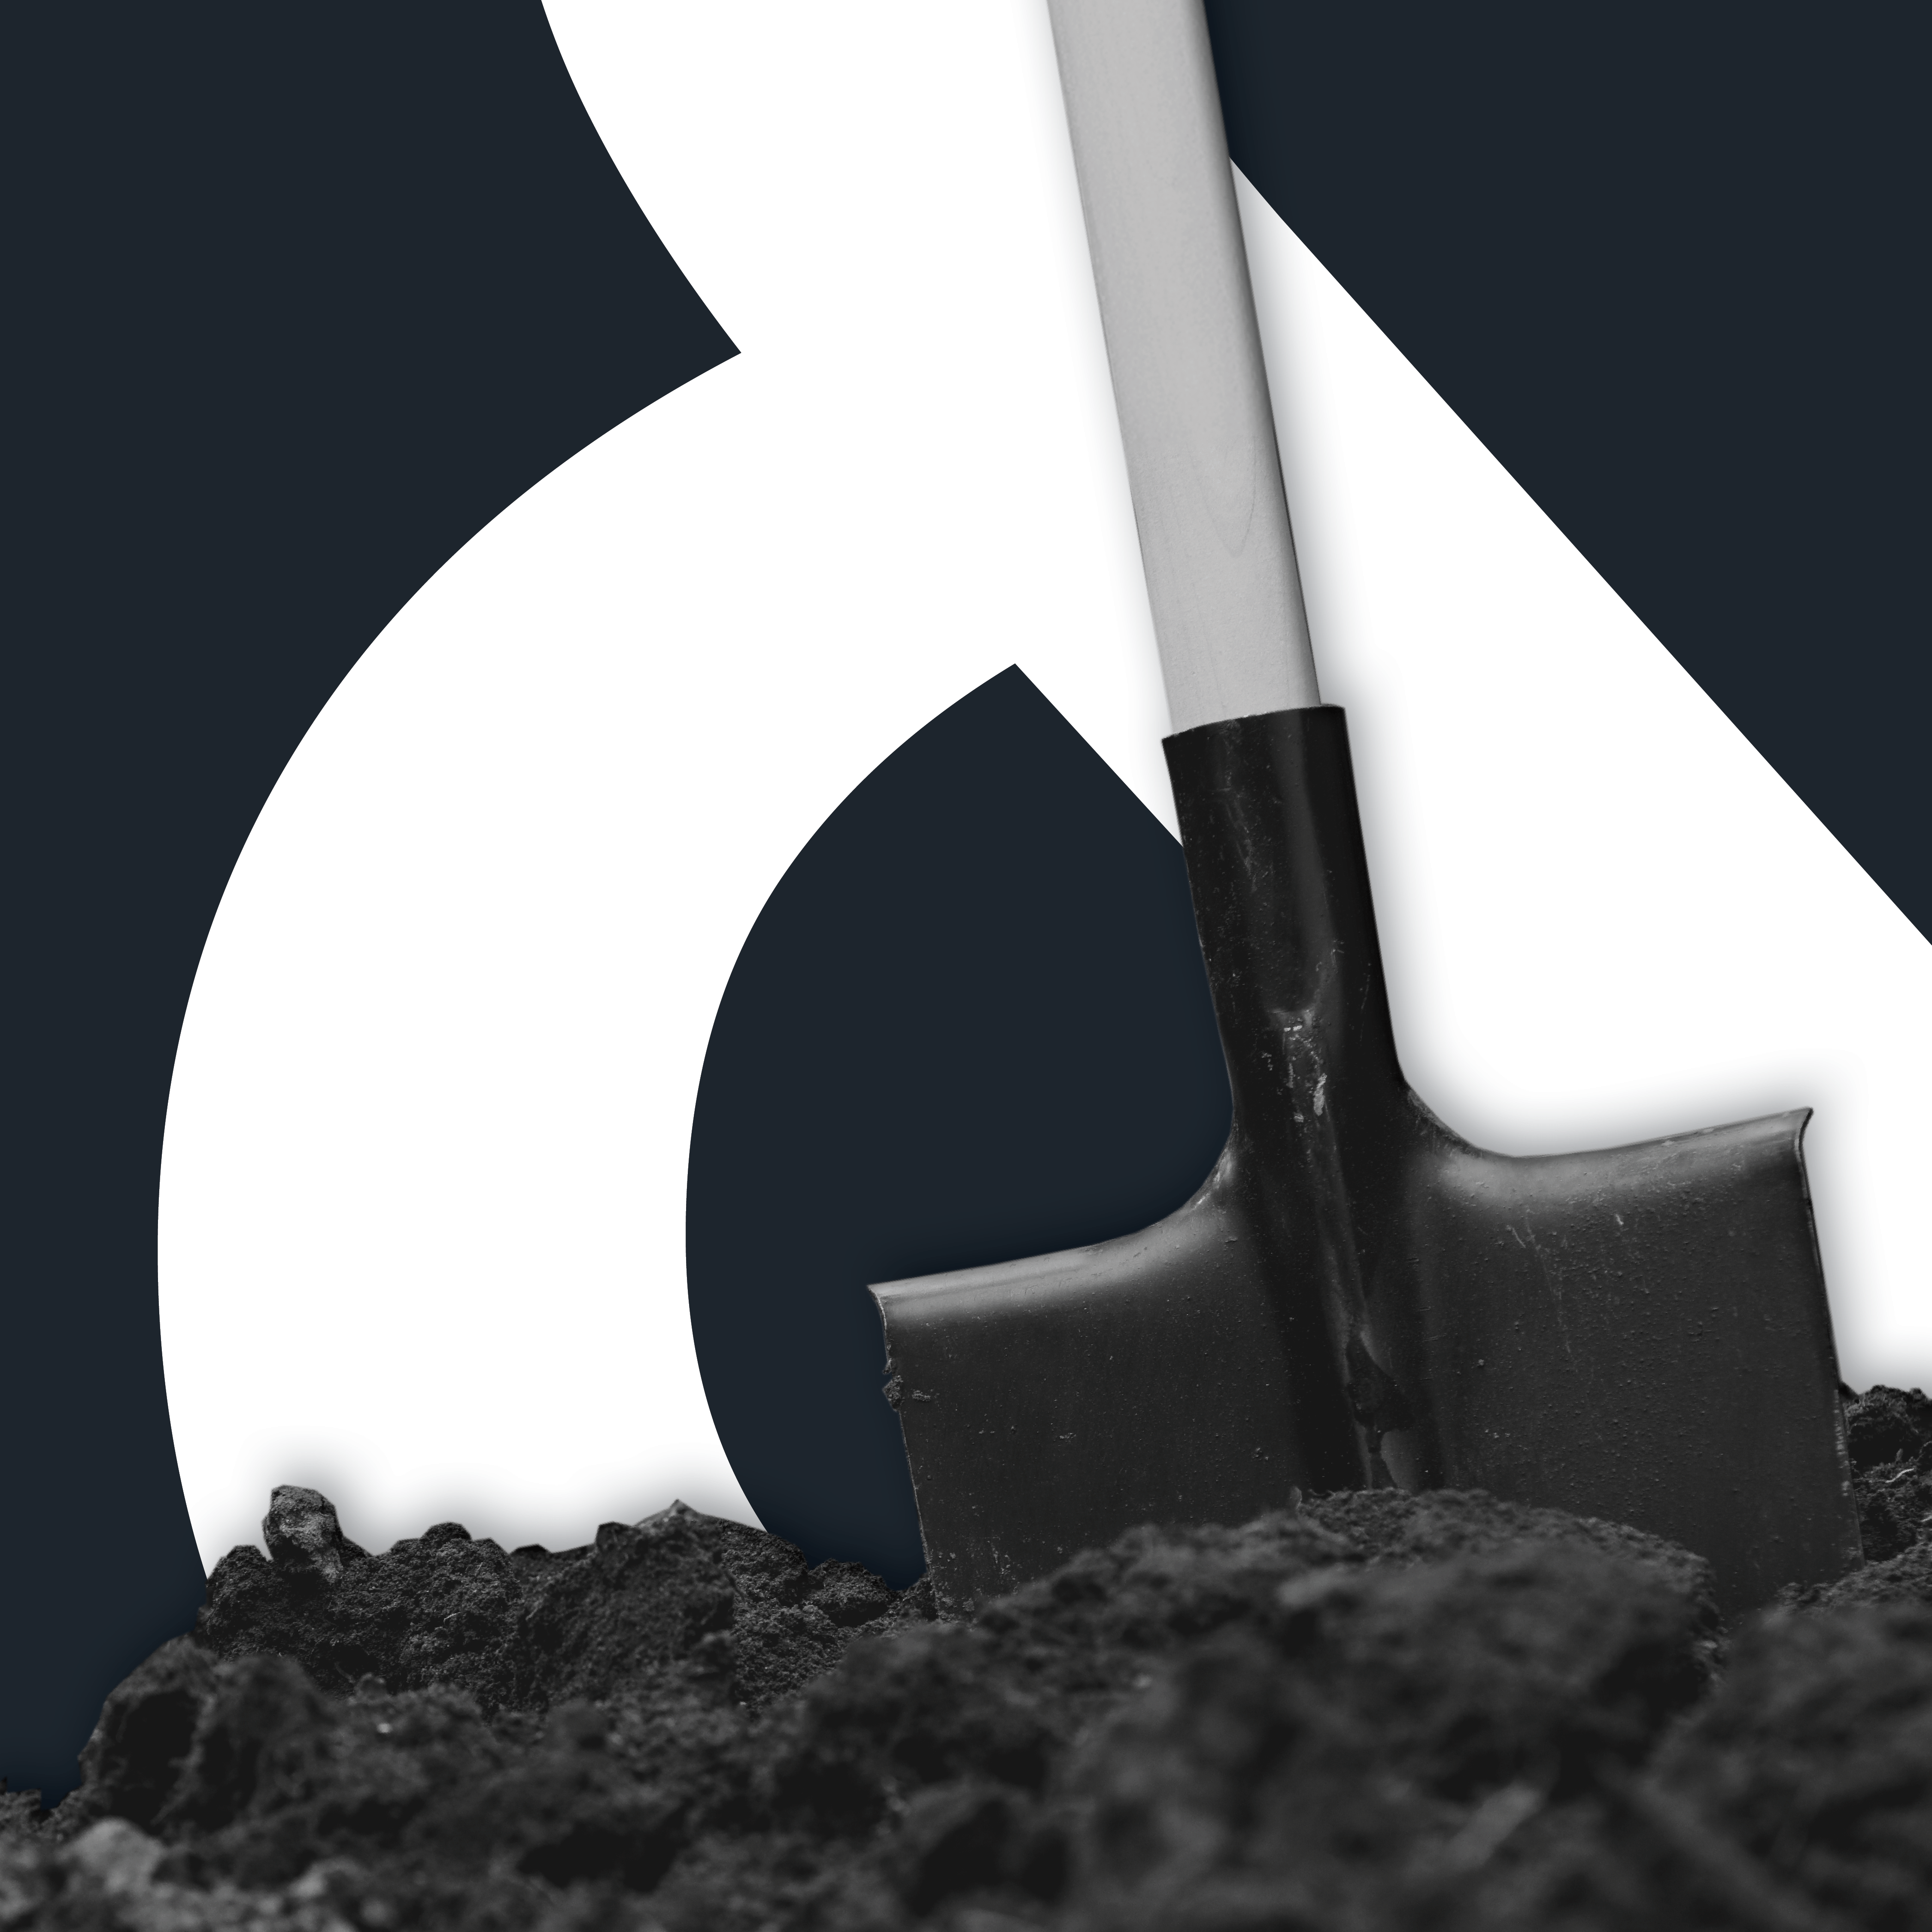 The featured image for the article: The power of why. It shows a shovel in dirt, representing digging deeper for meaning. The shovel and dirt are in grescale, over a dark blue background with a contrasting white ampersand.